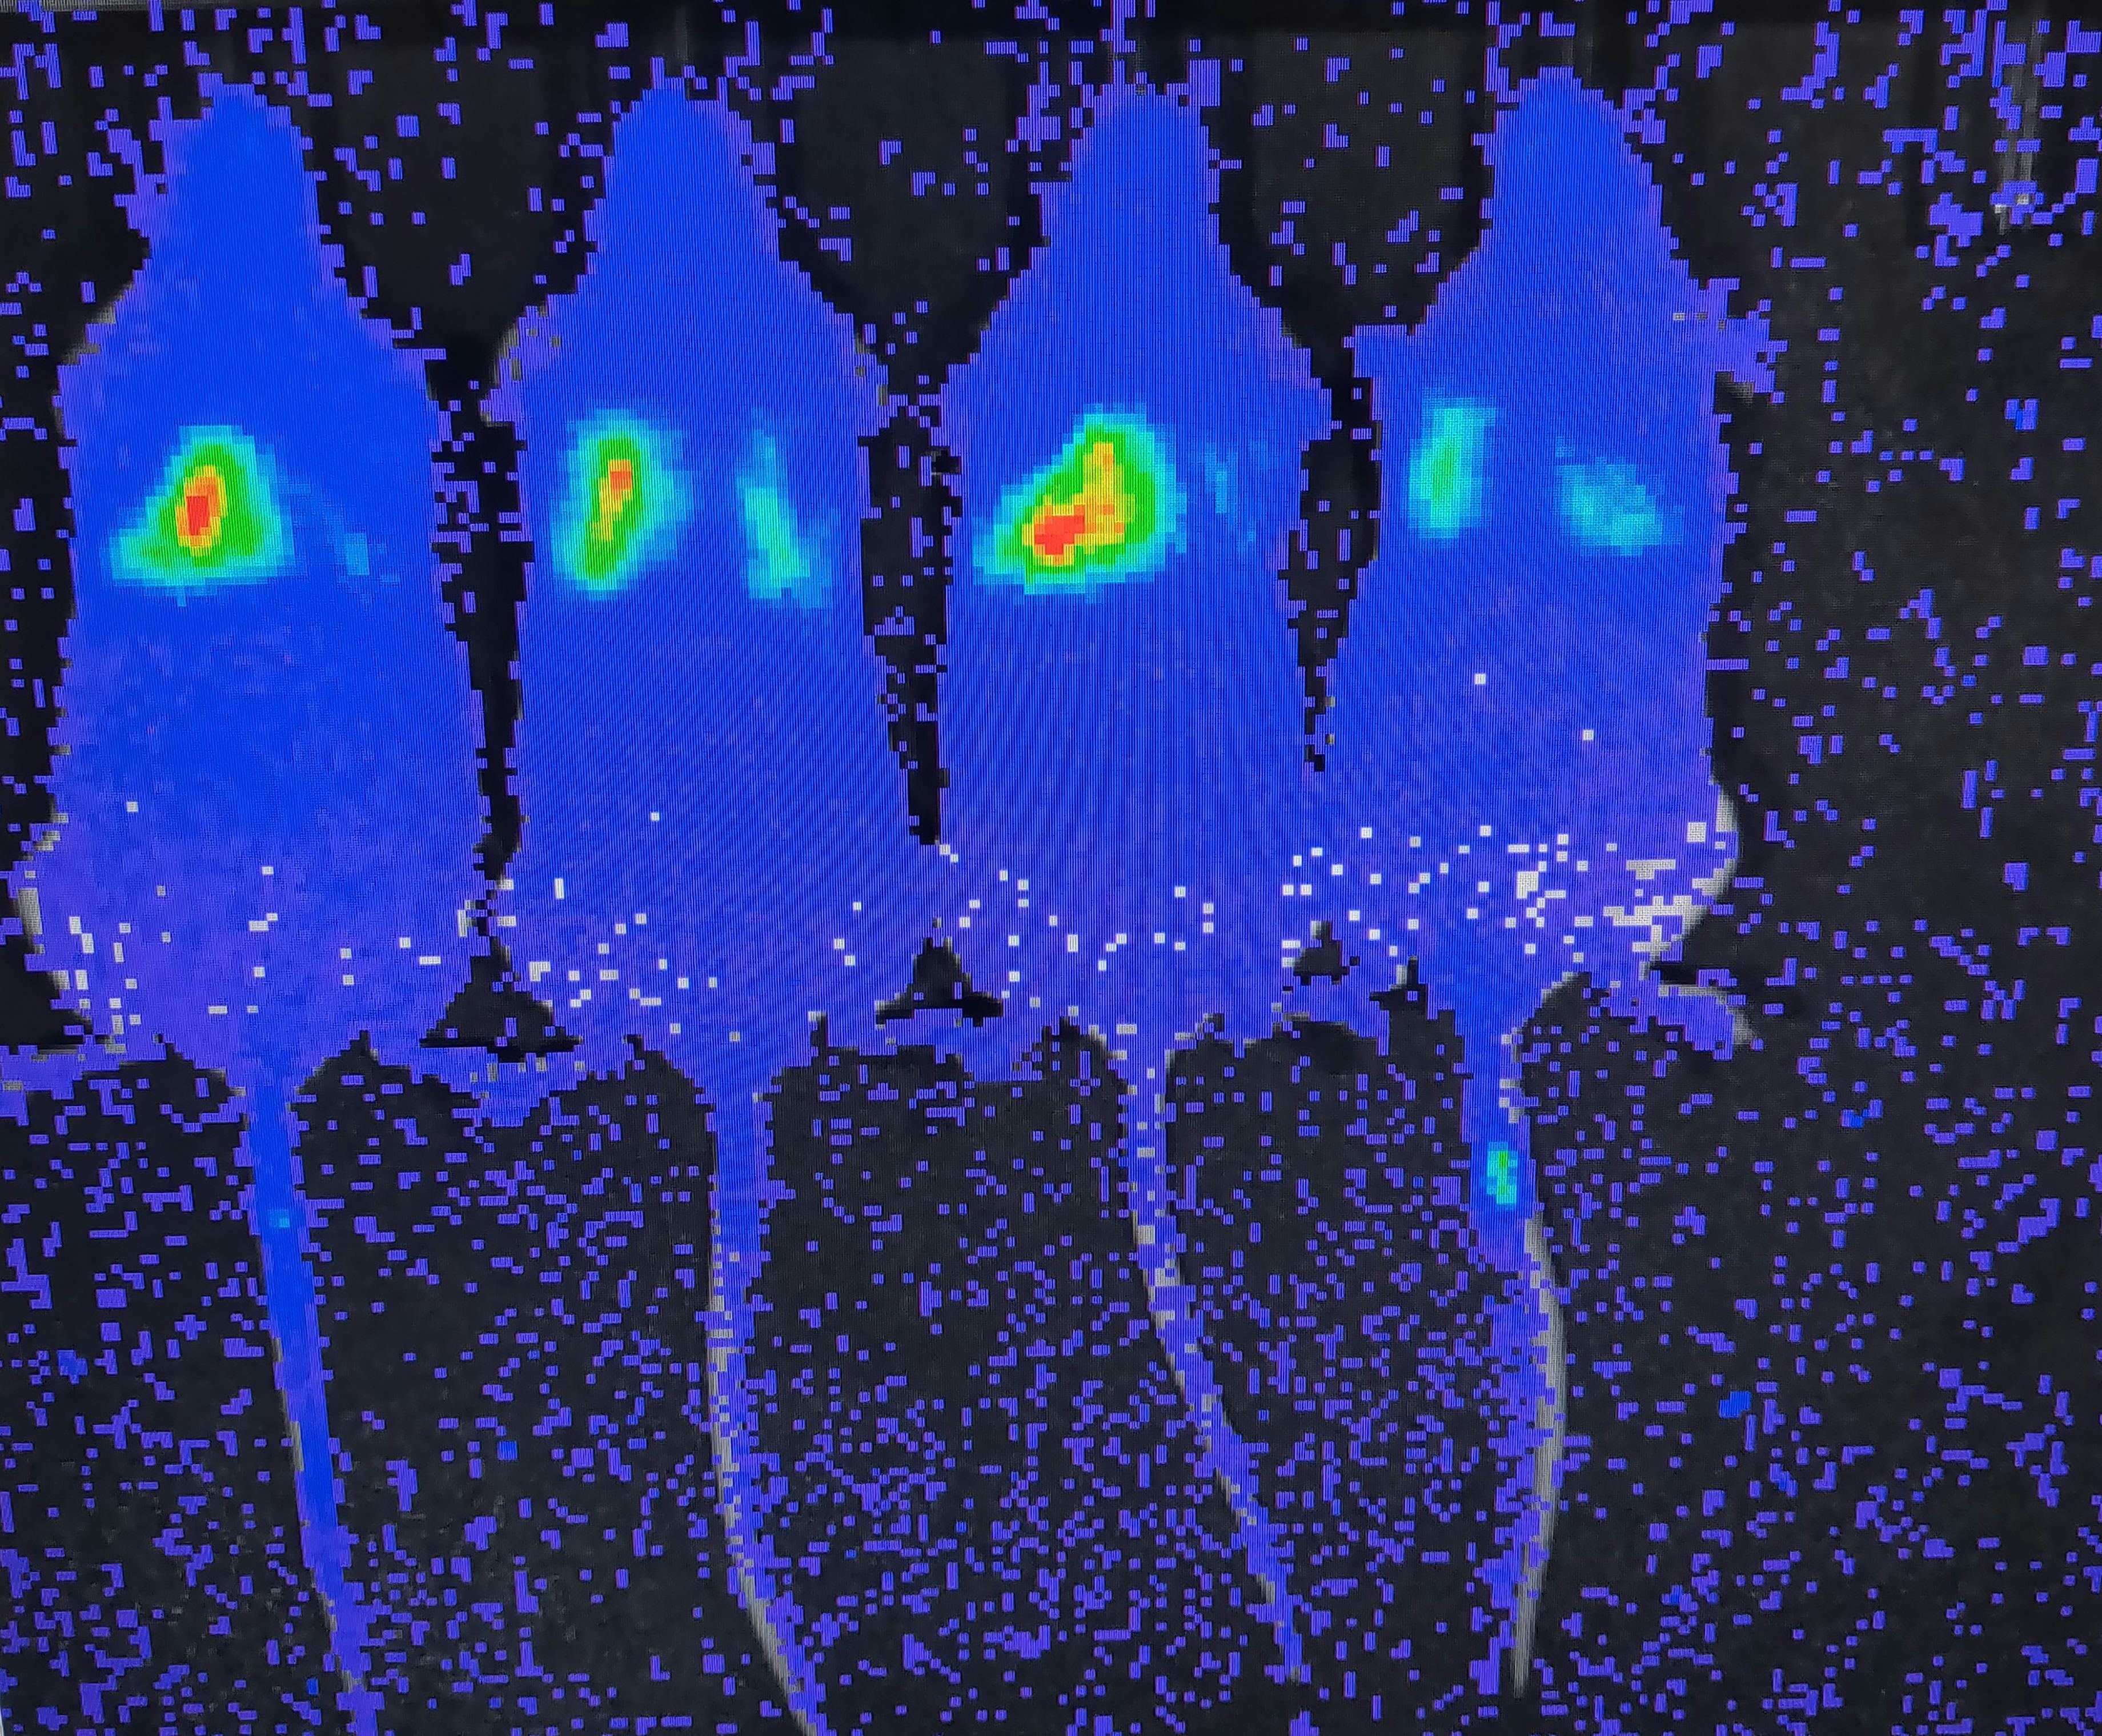 Image of mouse models used to test genetic metabolic vulnerabilities in cancer tumors.